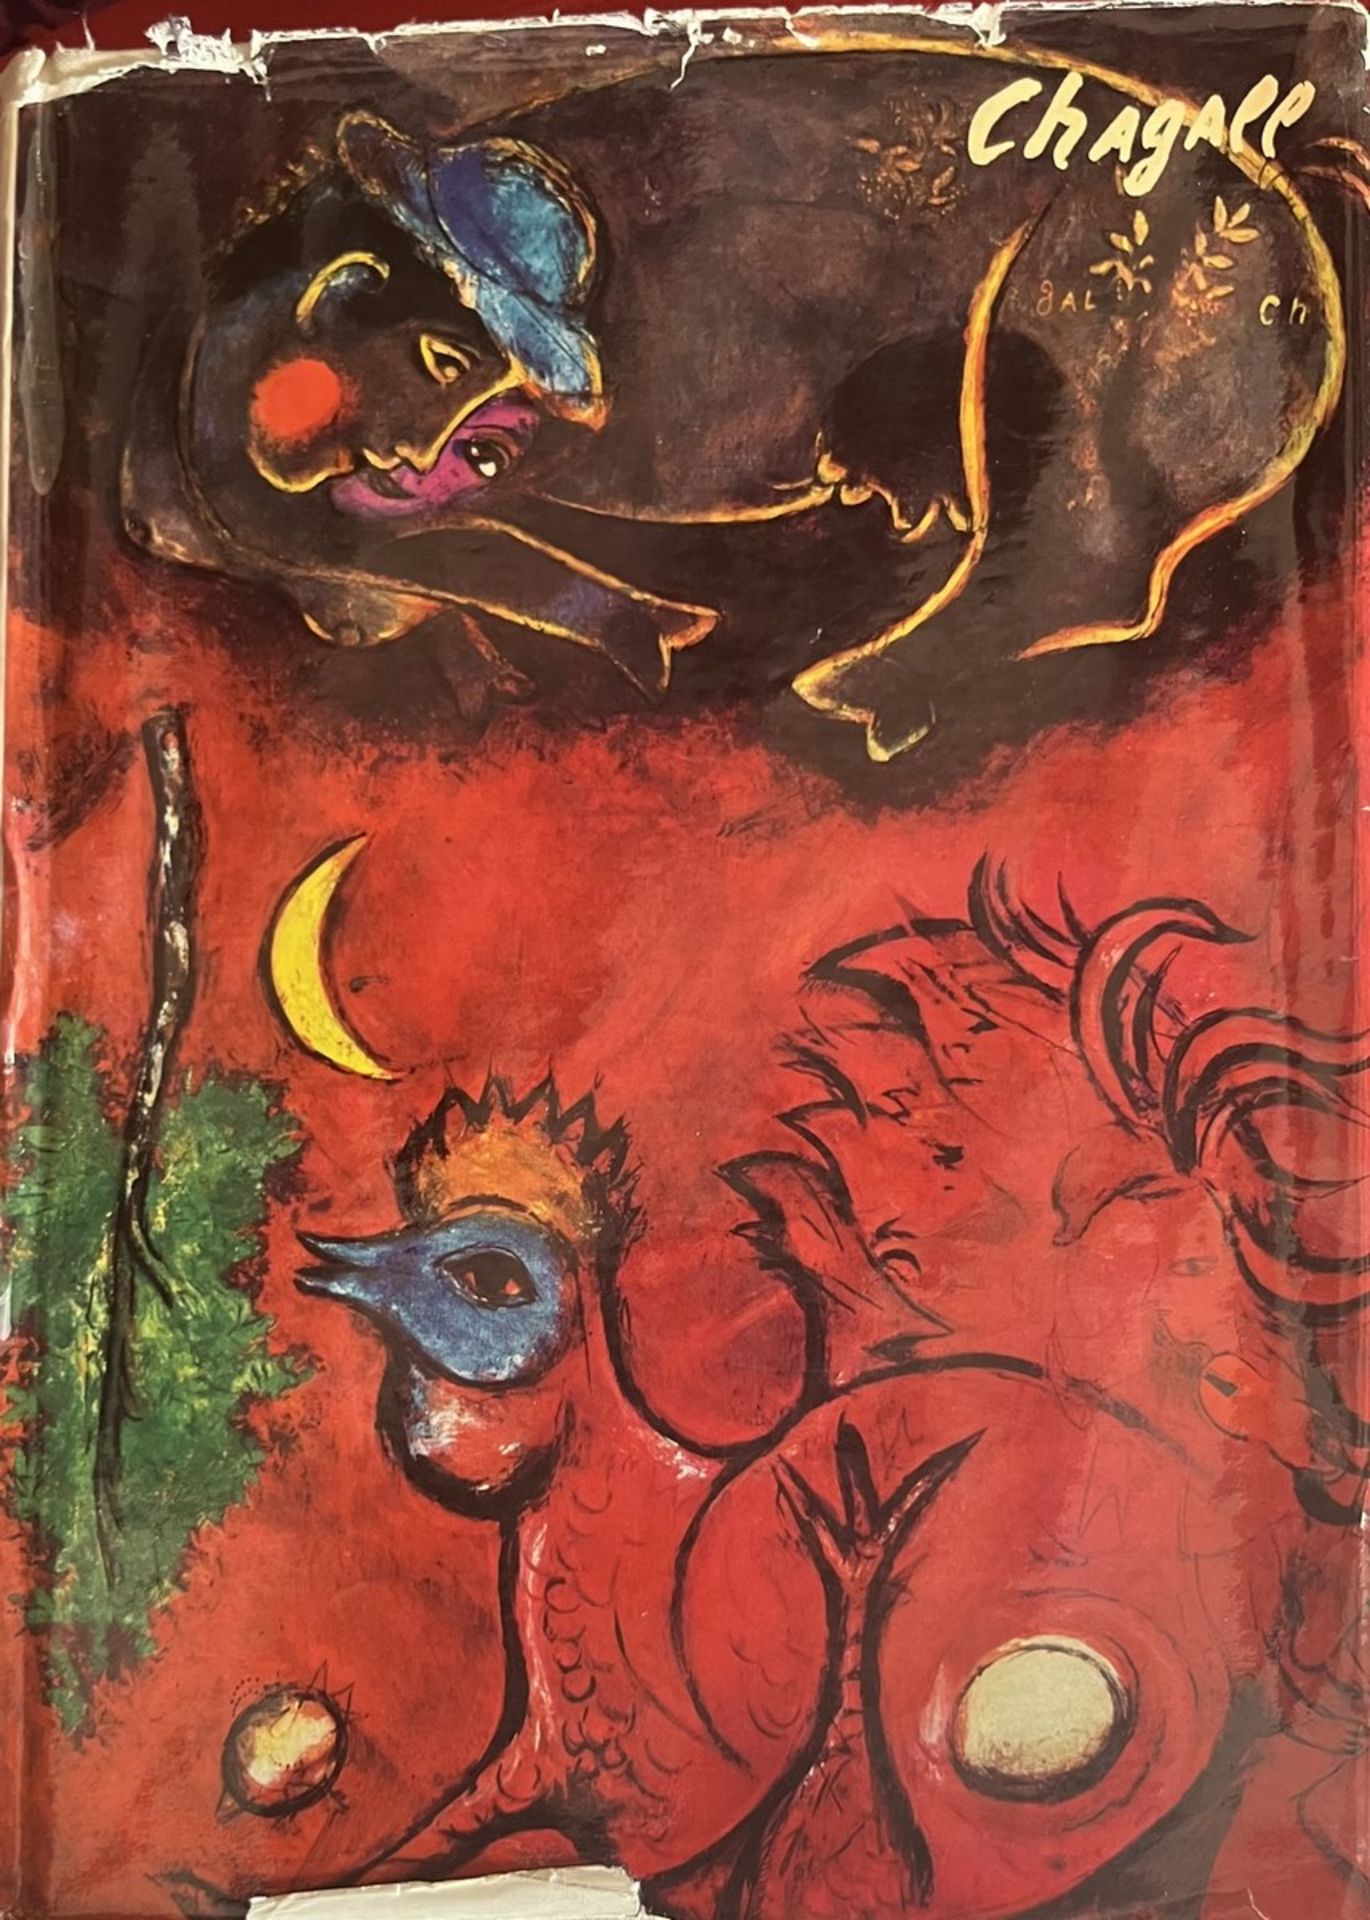 [CHAGALL]. Meyer, Franz, Chagall. - Image 2 of 3